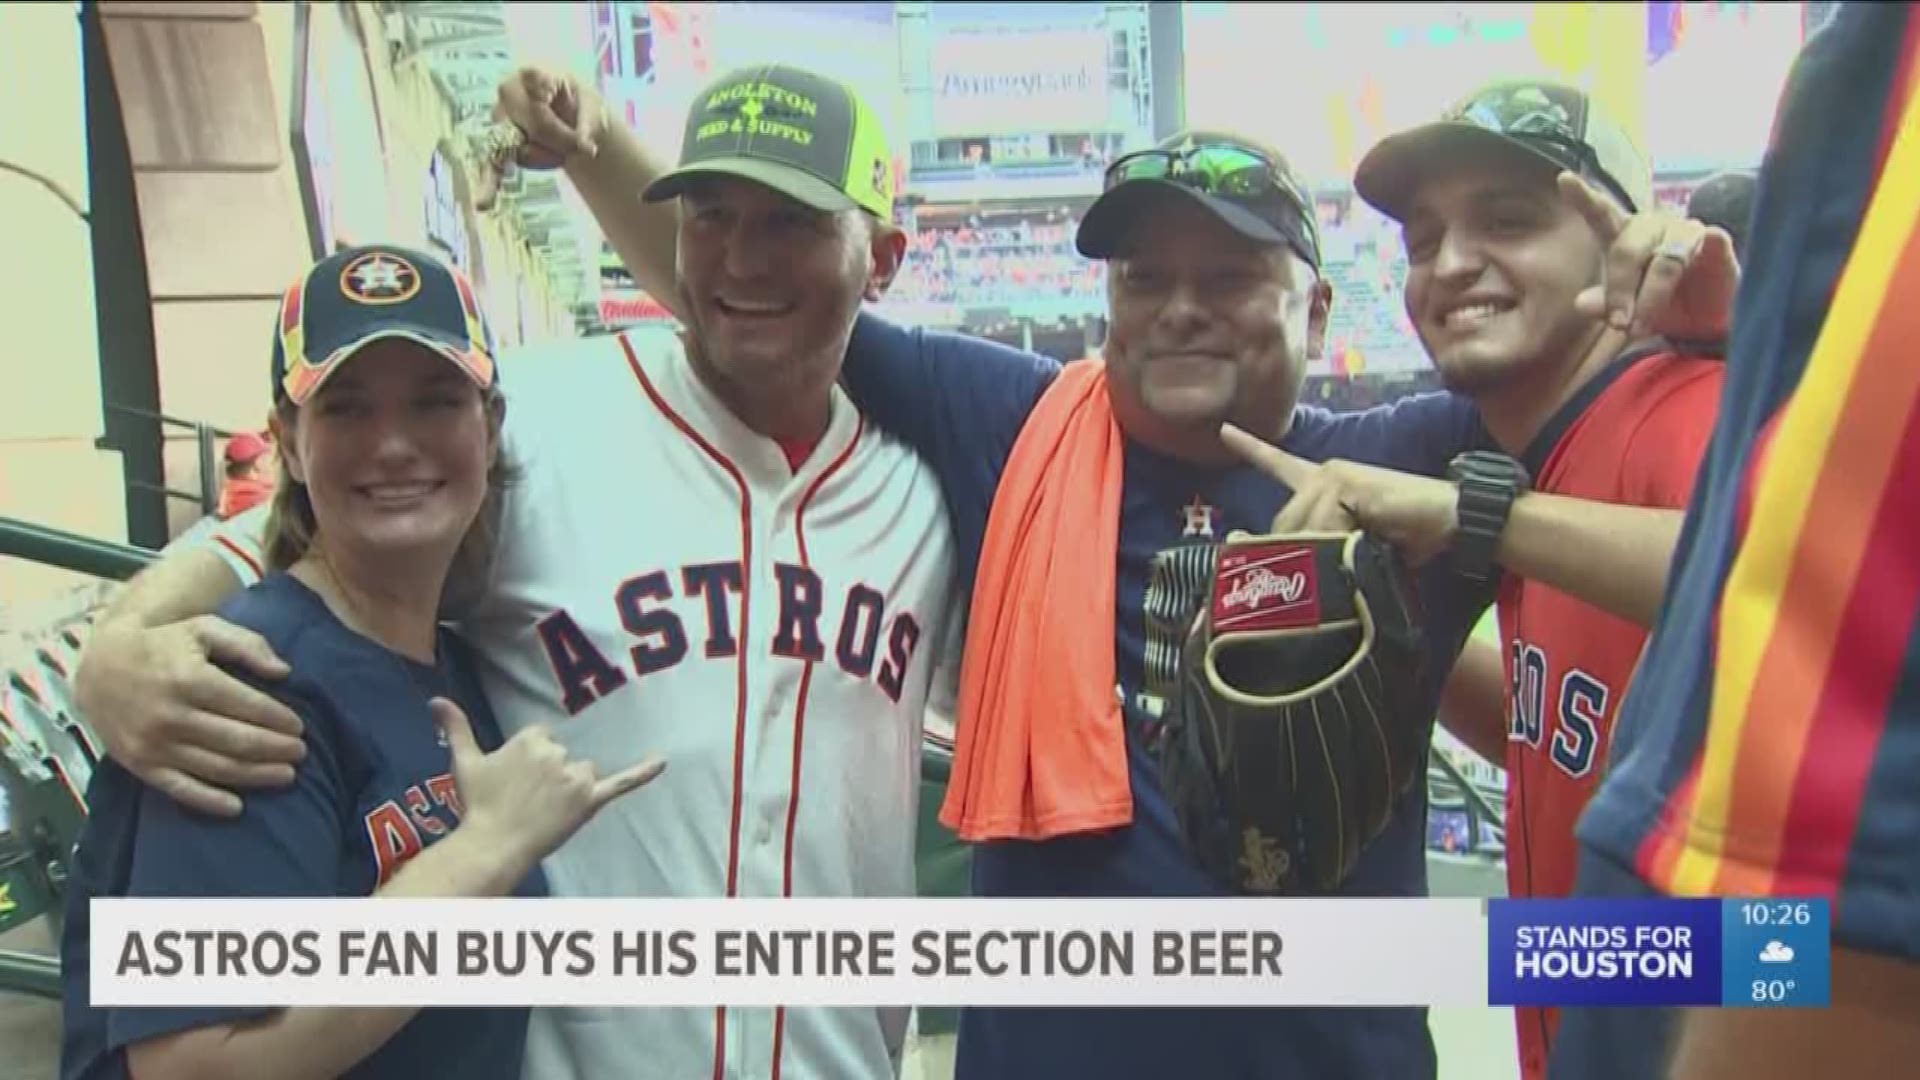 An Astros fan said he would buy beer for his entire section if George Springer hit a home run in the 5th inning of Game 1. And Springer gave him a dinger.